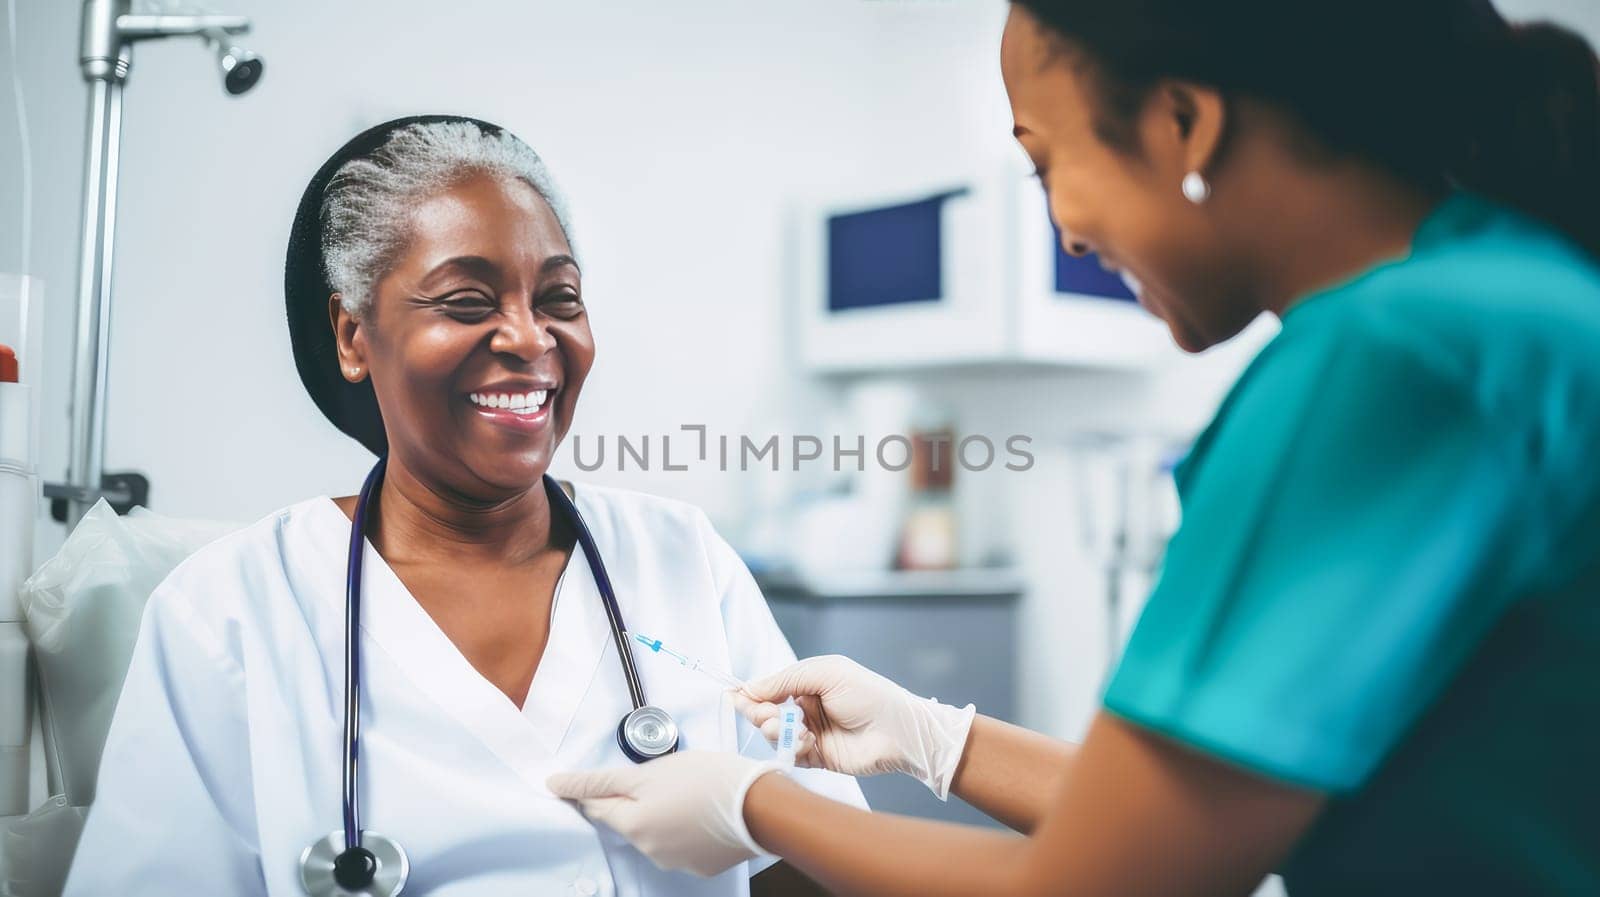 An elderly old patient, a dark-skinned African-American woman, at an appointment with a doctor in a modern bright medical ward of a hospital with modern equipment, new technologies. Hospital, medicine, doctor and pharmaceutical company, healthcare and health insurance.